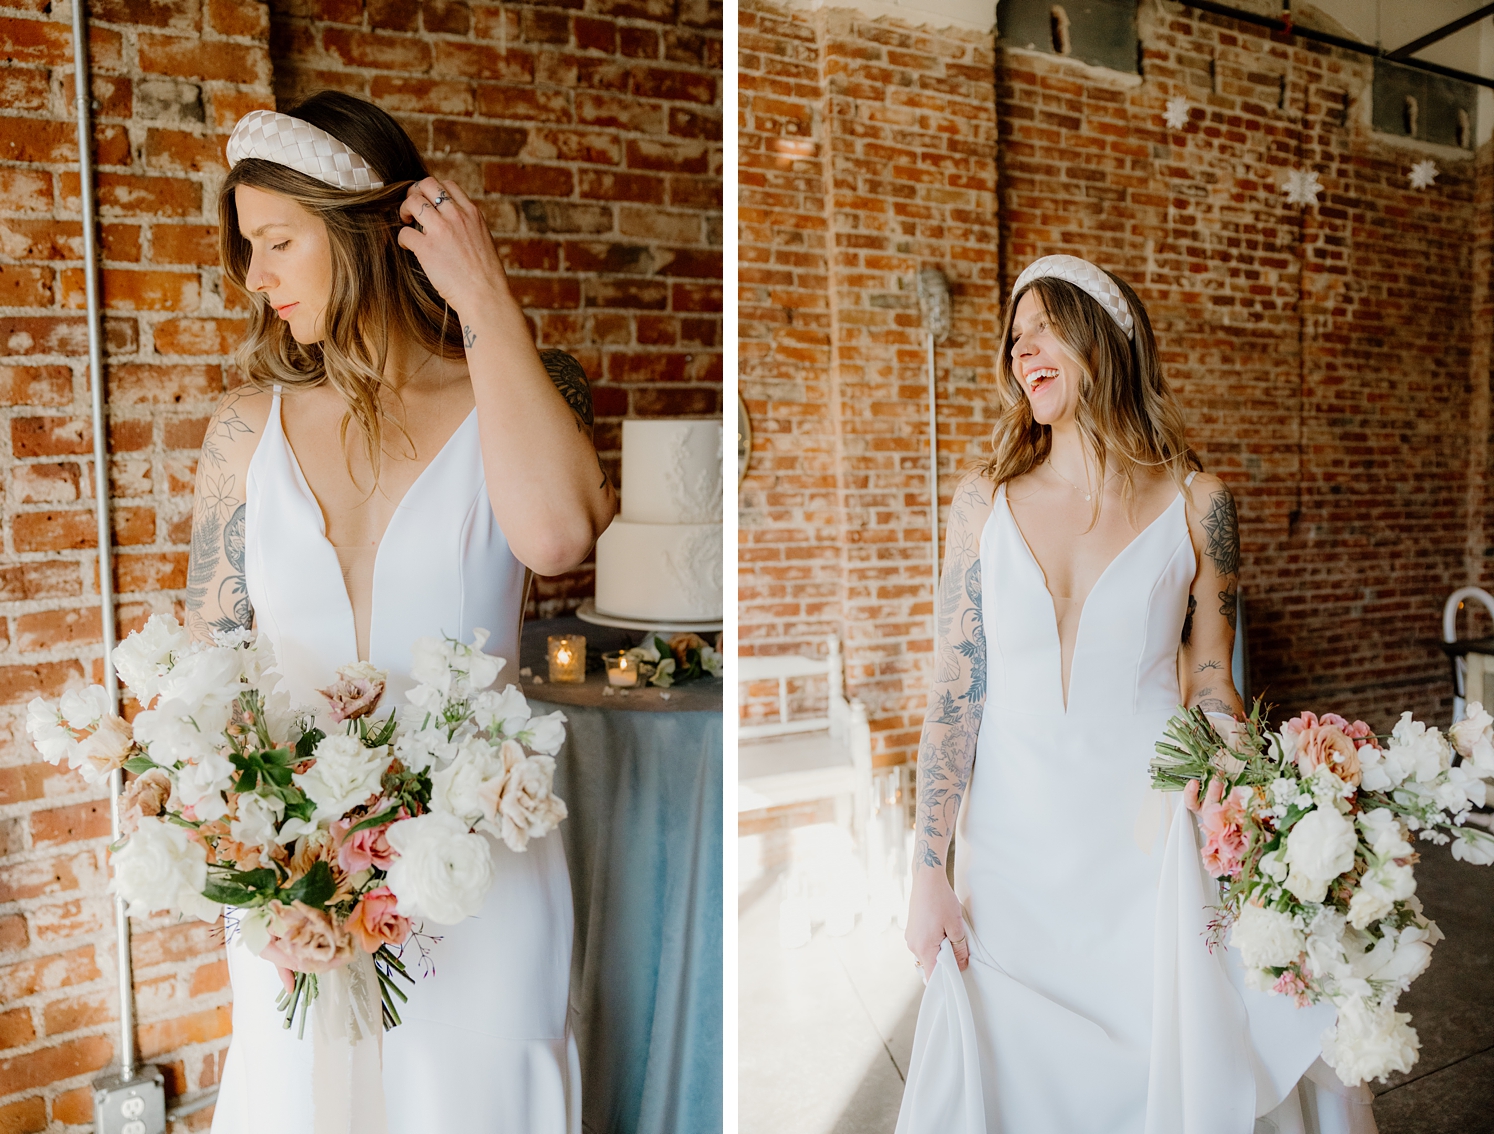 Bride in statement headband holding bouquet | bride holding dress and bouquet and laughing | McArthur Weddings and Events